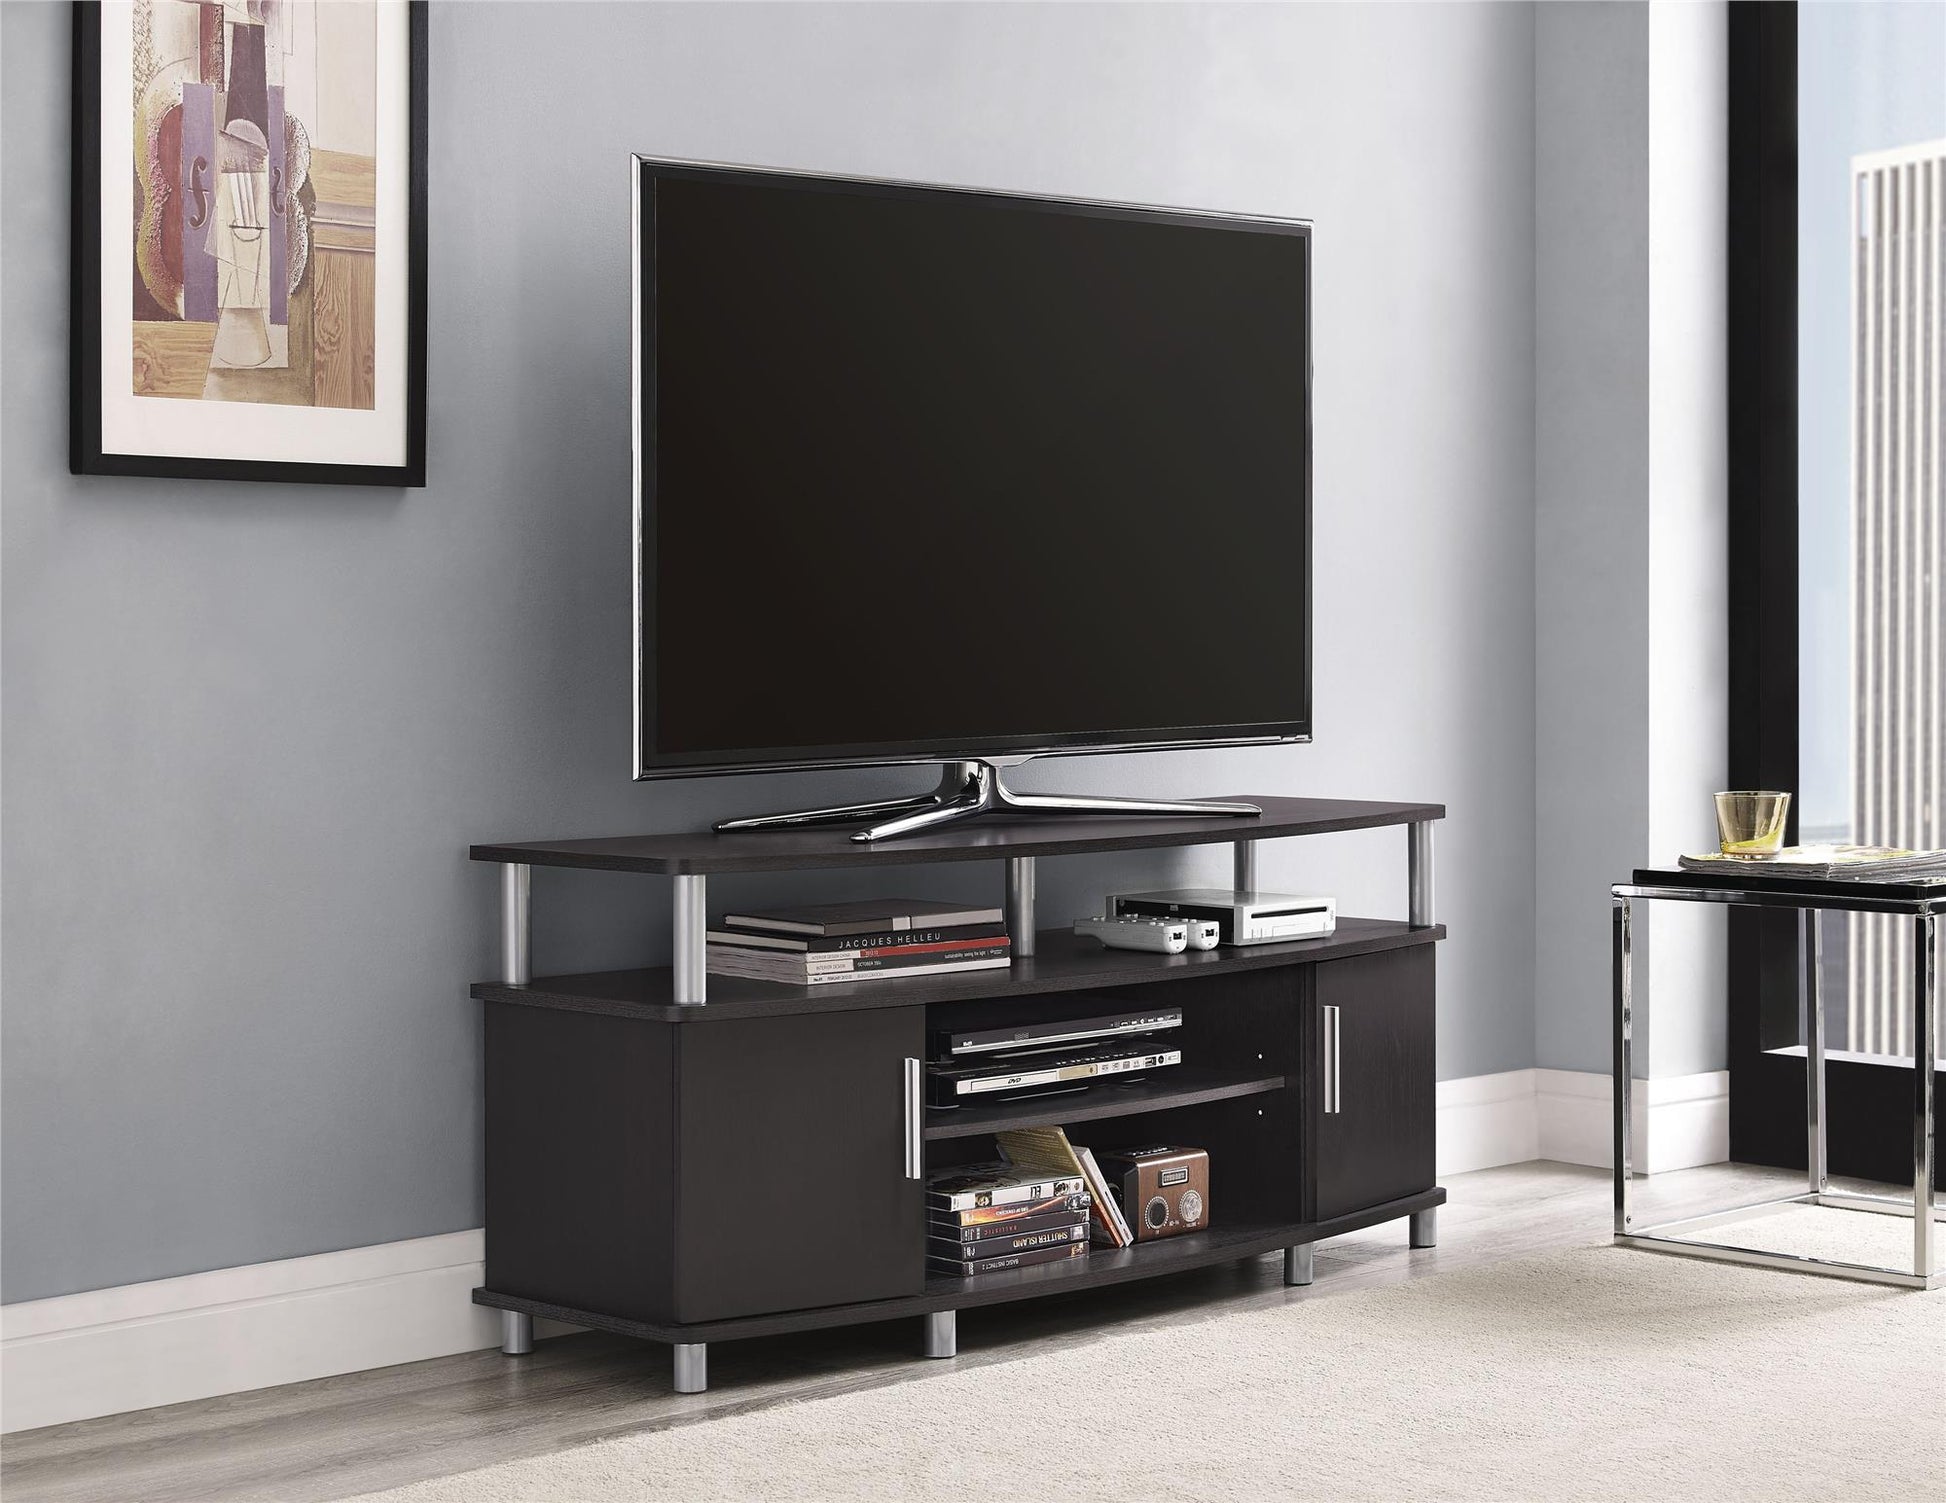 Carson Contemporary TV Stand for TVs up to 50 Inch - Espresso